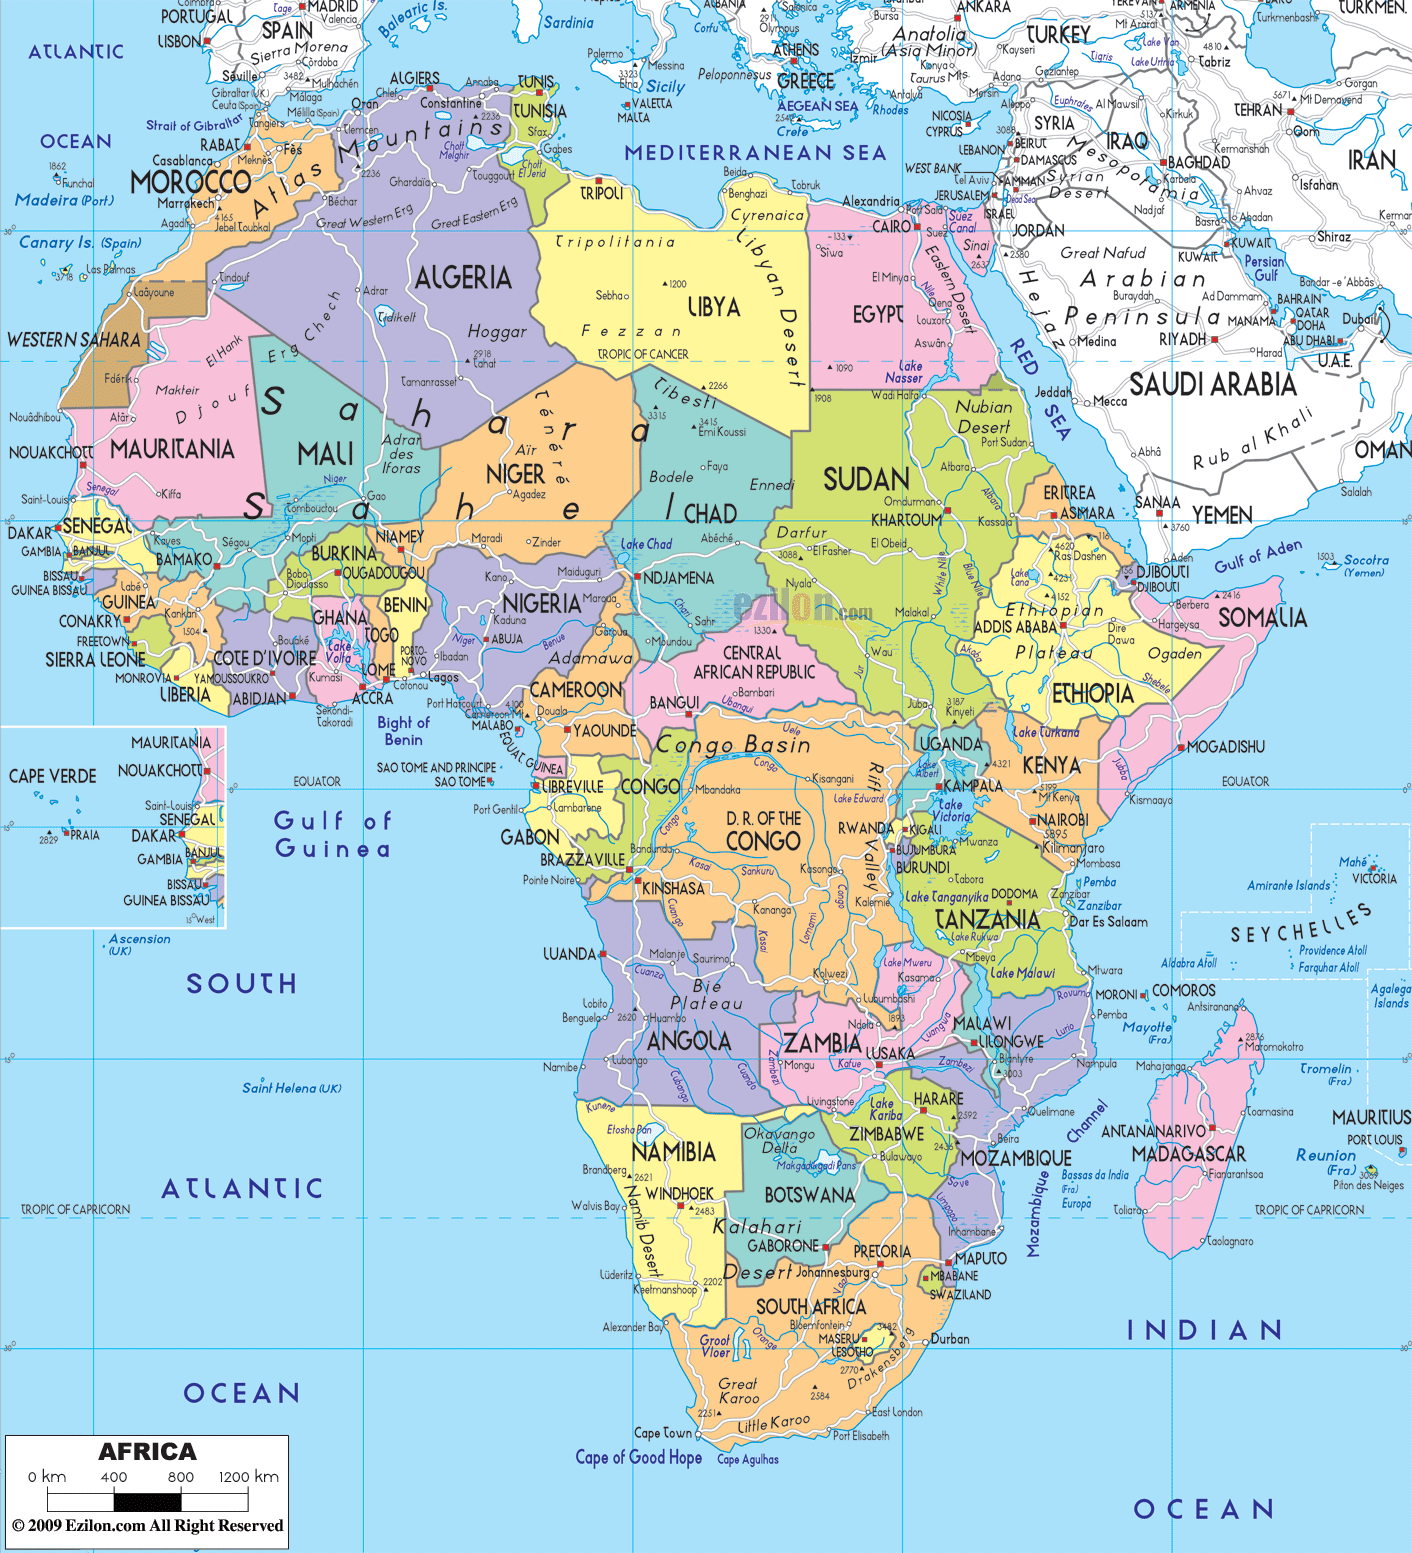 Africa Map - Our Trip to Africa